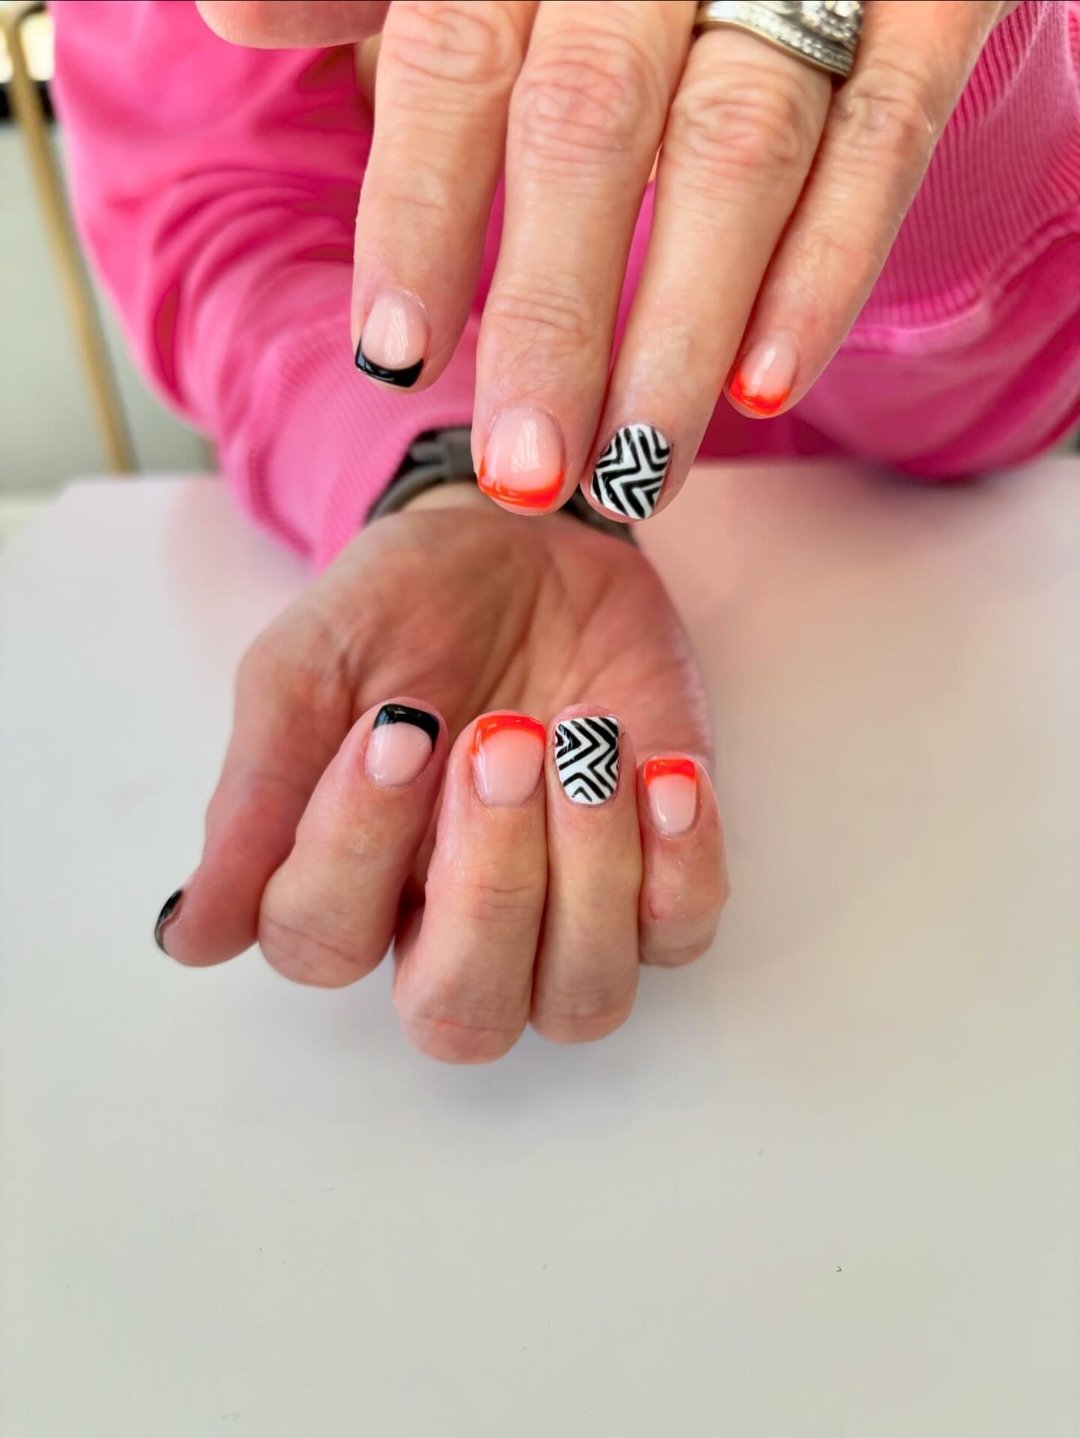 Nails| Mary Keithly 
.
.
.
. #stillwaterok #stillwater #stillwaternails #405nails #stillwatersalon #nails #nailtech #nailsoftheday #nailsofinstagram #nails